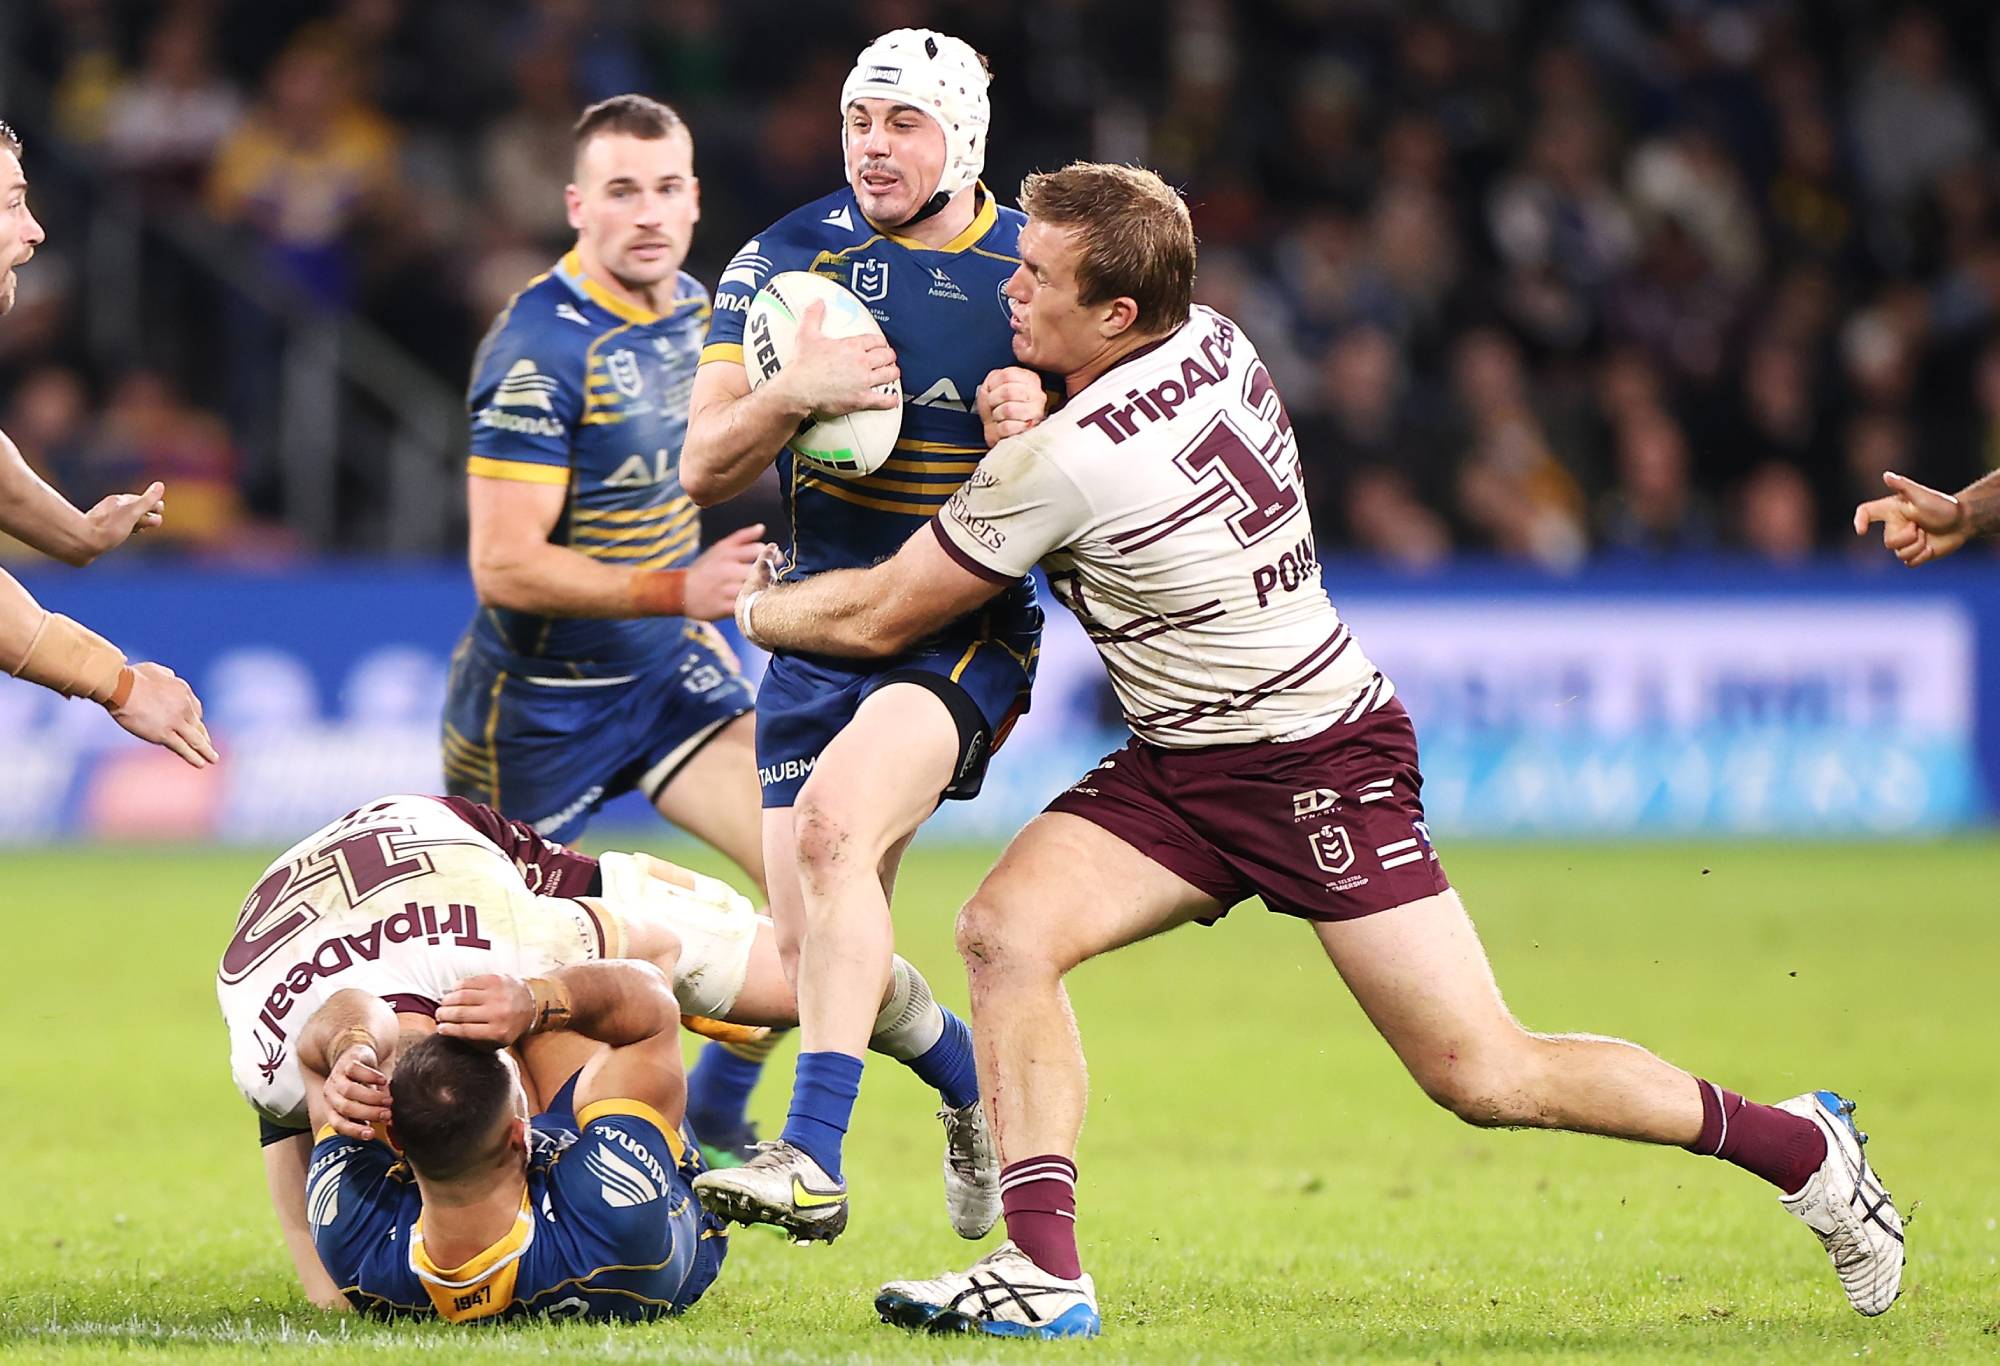 SYDNEY, AUSTRALIA - MAY 20: Reed Mahoney of the Eels is tackled by Jake Trbojevic of the Sea Eagles during the NRL Round 11 match between the Parramatta Eels and the Manly Sea Eagles at CommBank Stadium on May 20, 2022, in Sydney, Australia.  (Photo by Mark Kolbe/Getty Images)